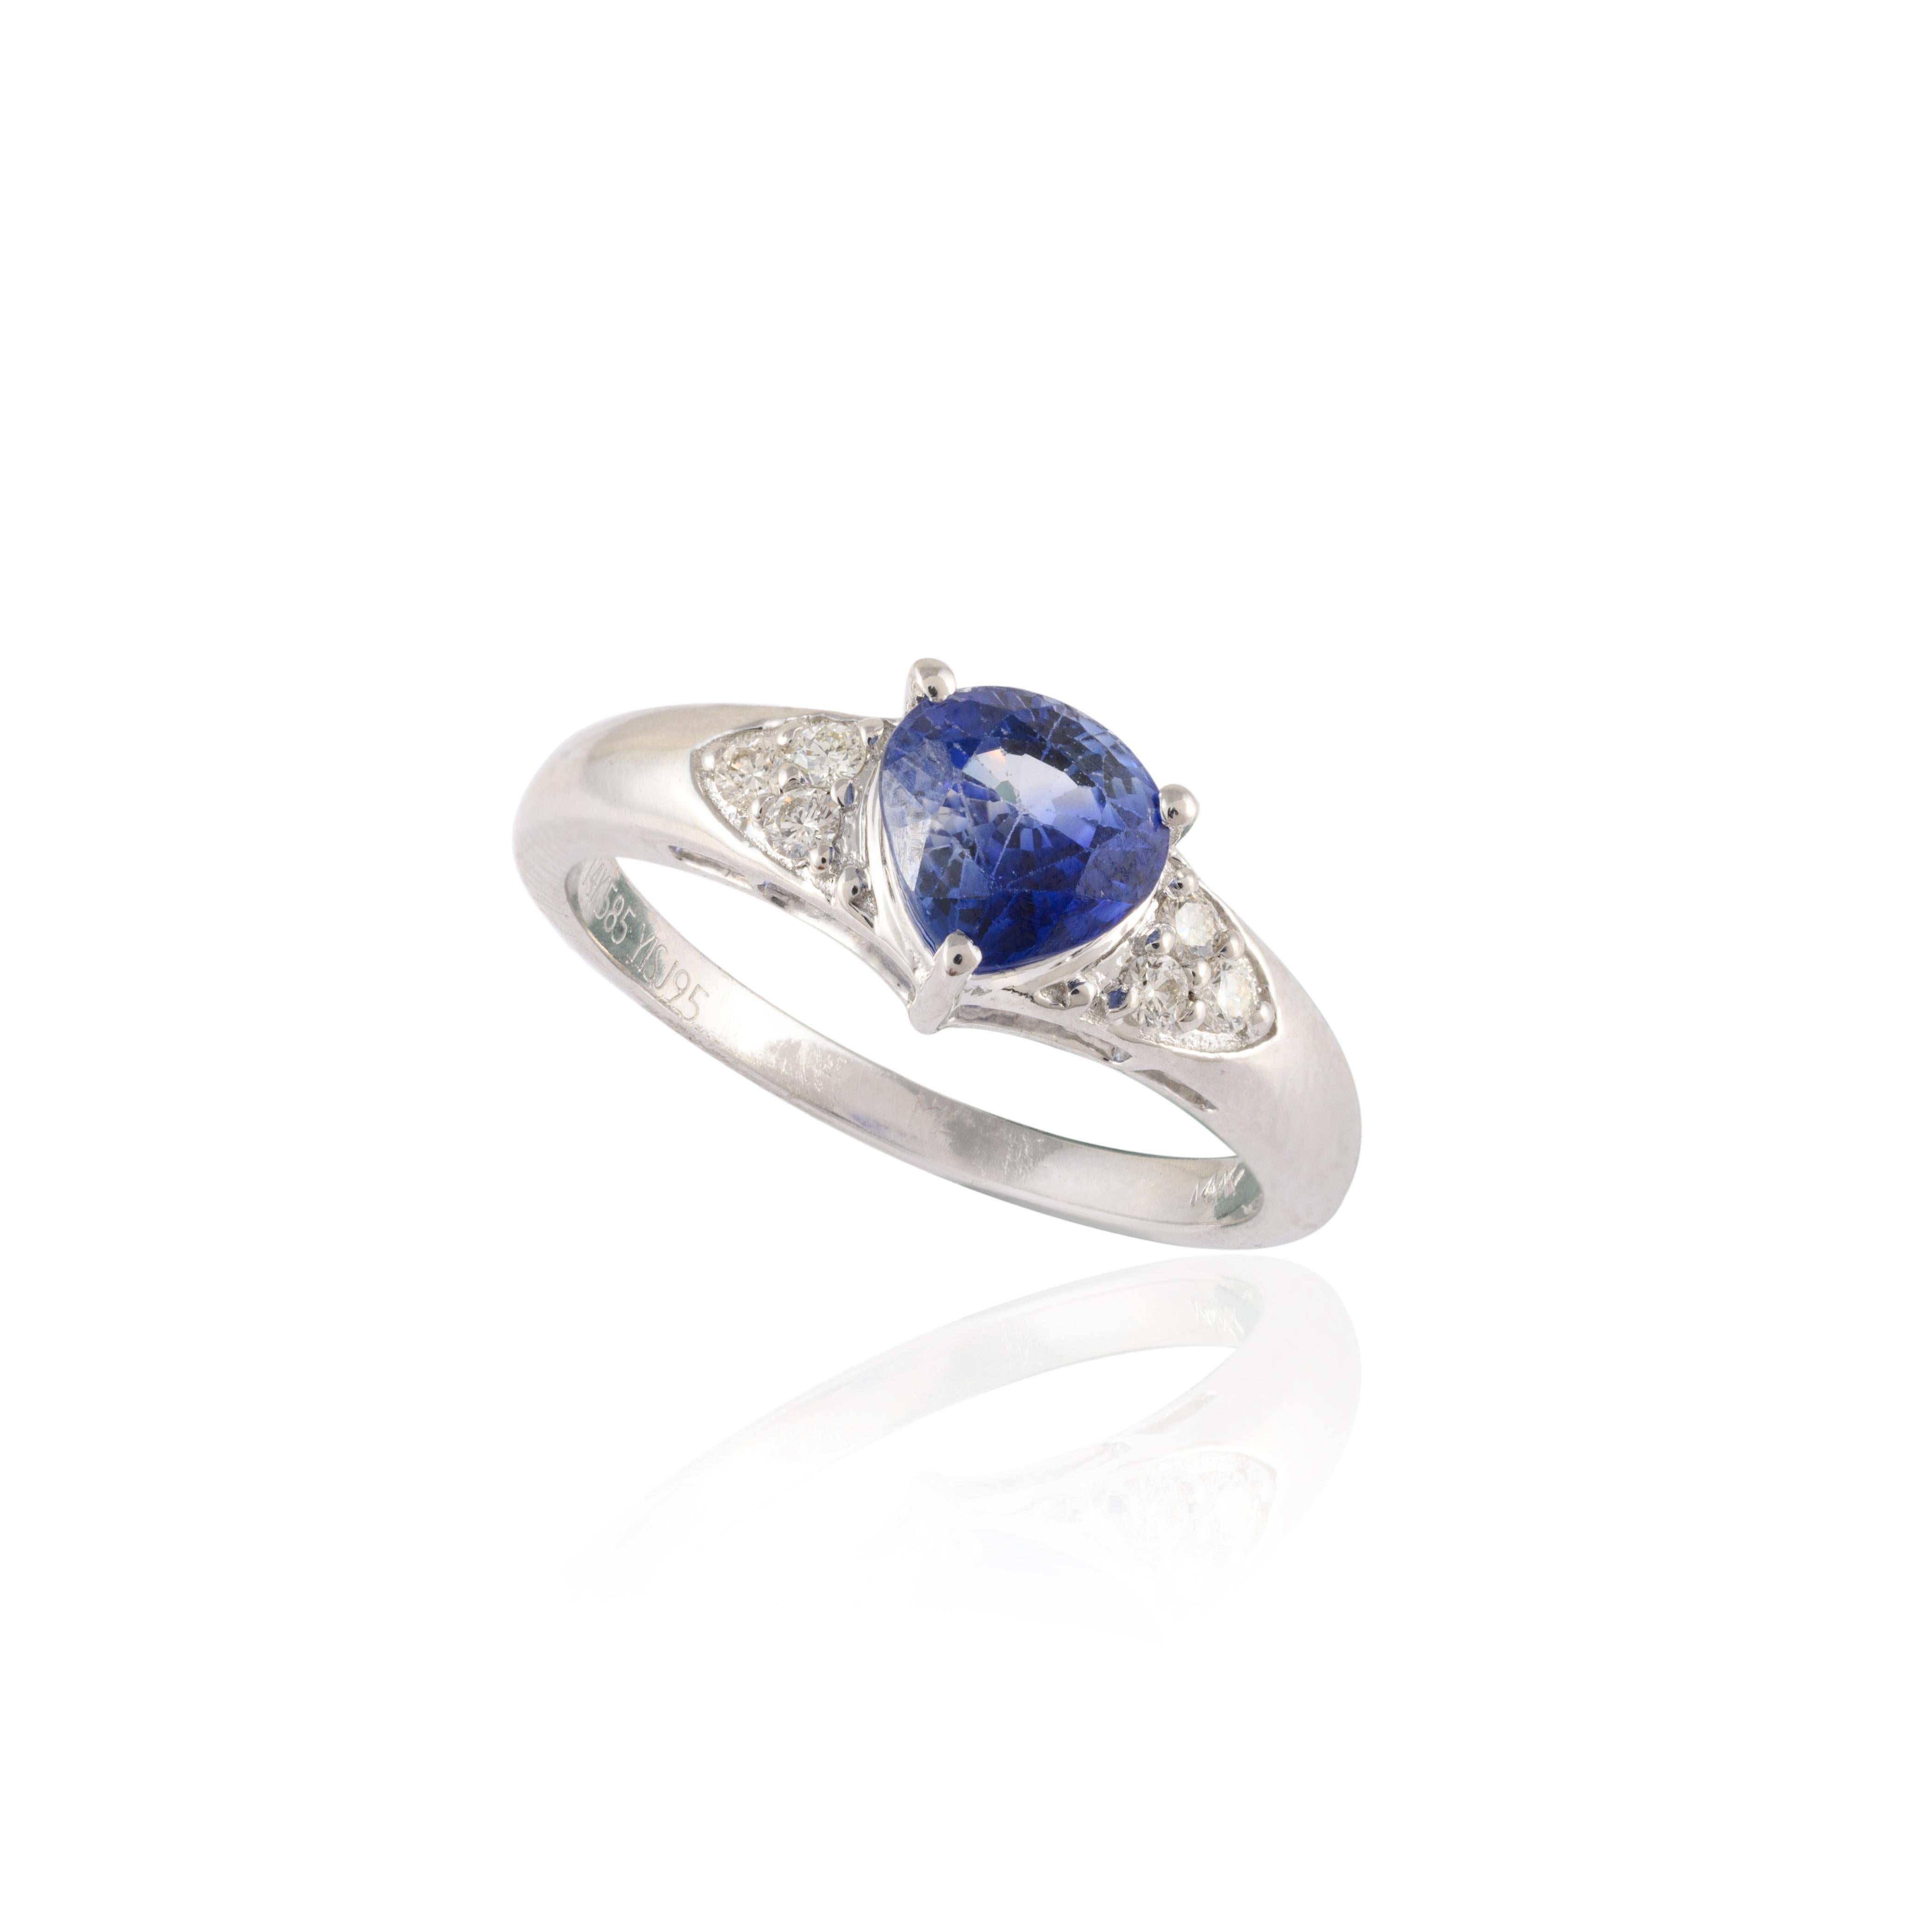 For Sale:  14k White Gold Trillion Cut Sapphire Birthstone Engagement Ring with Diamonds 8